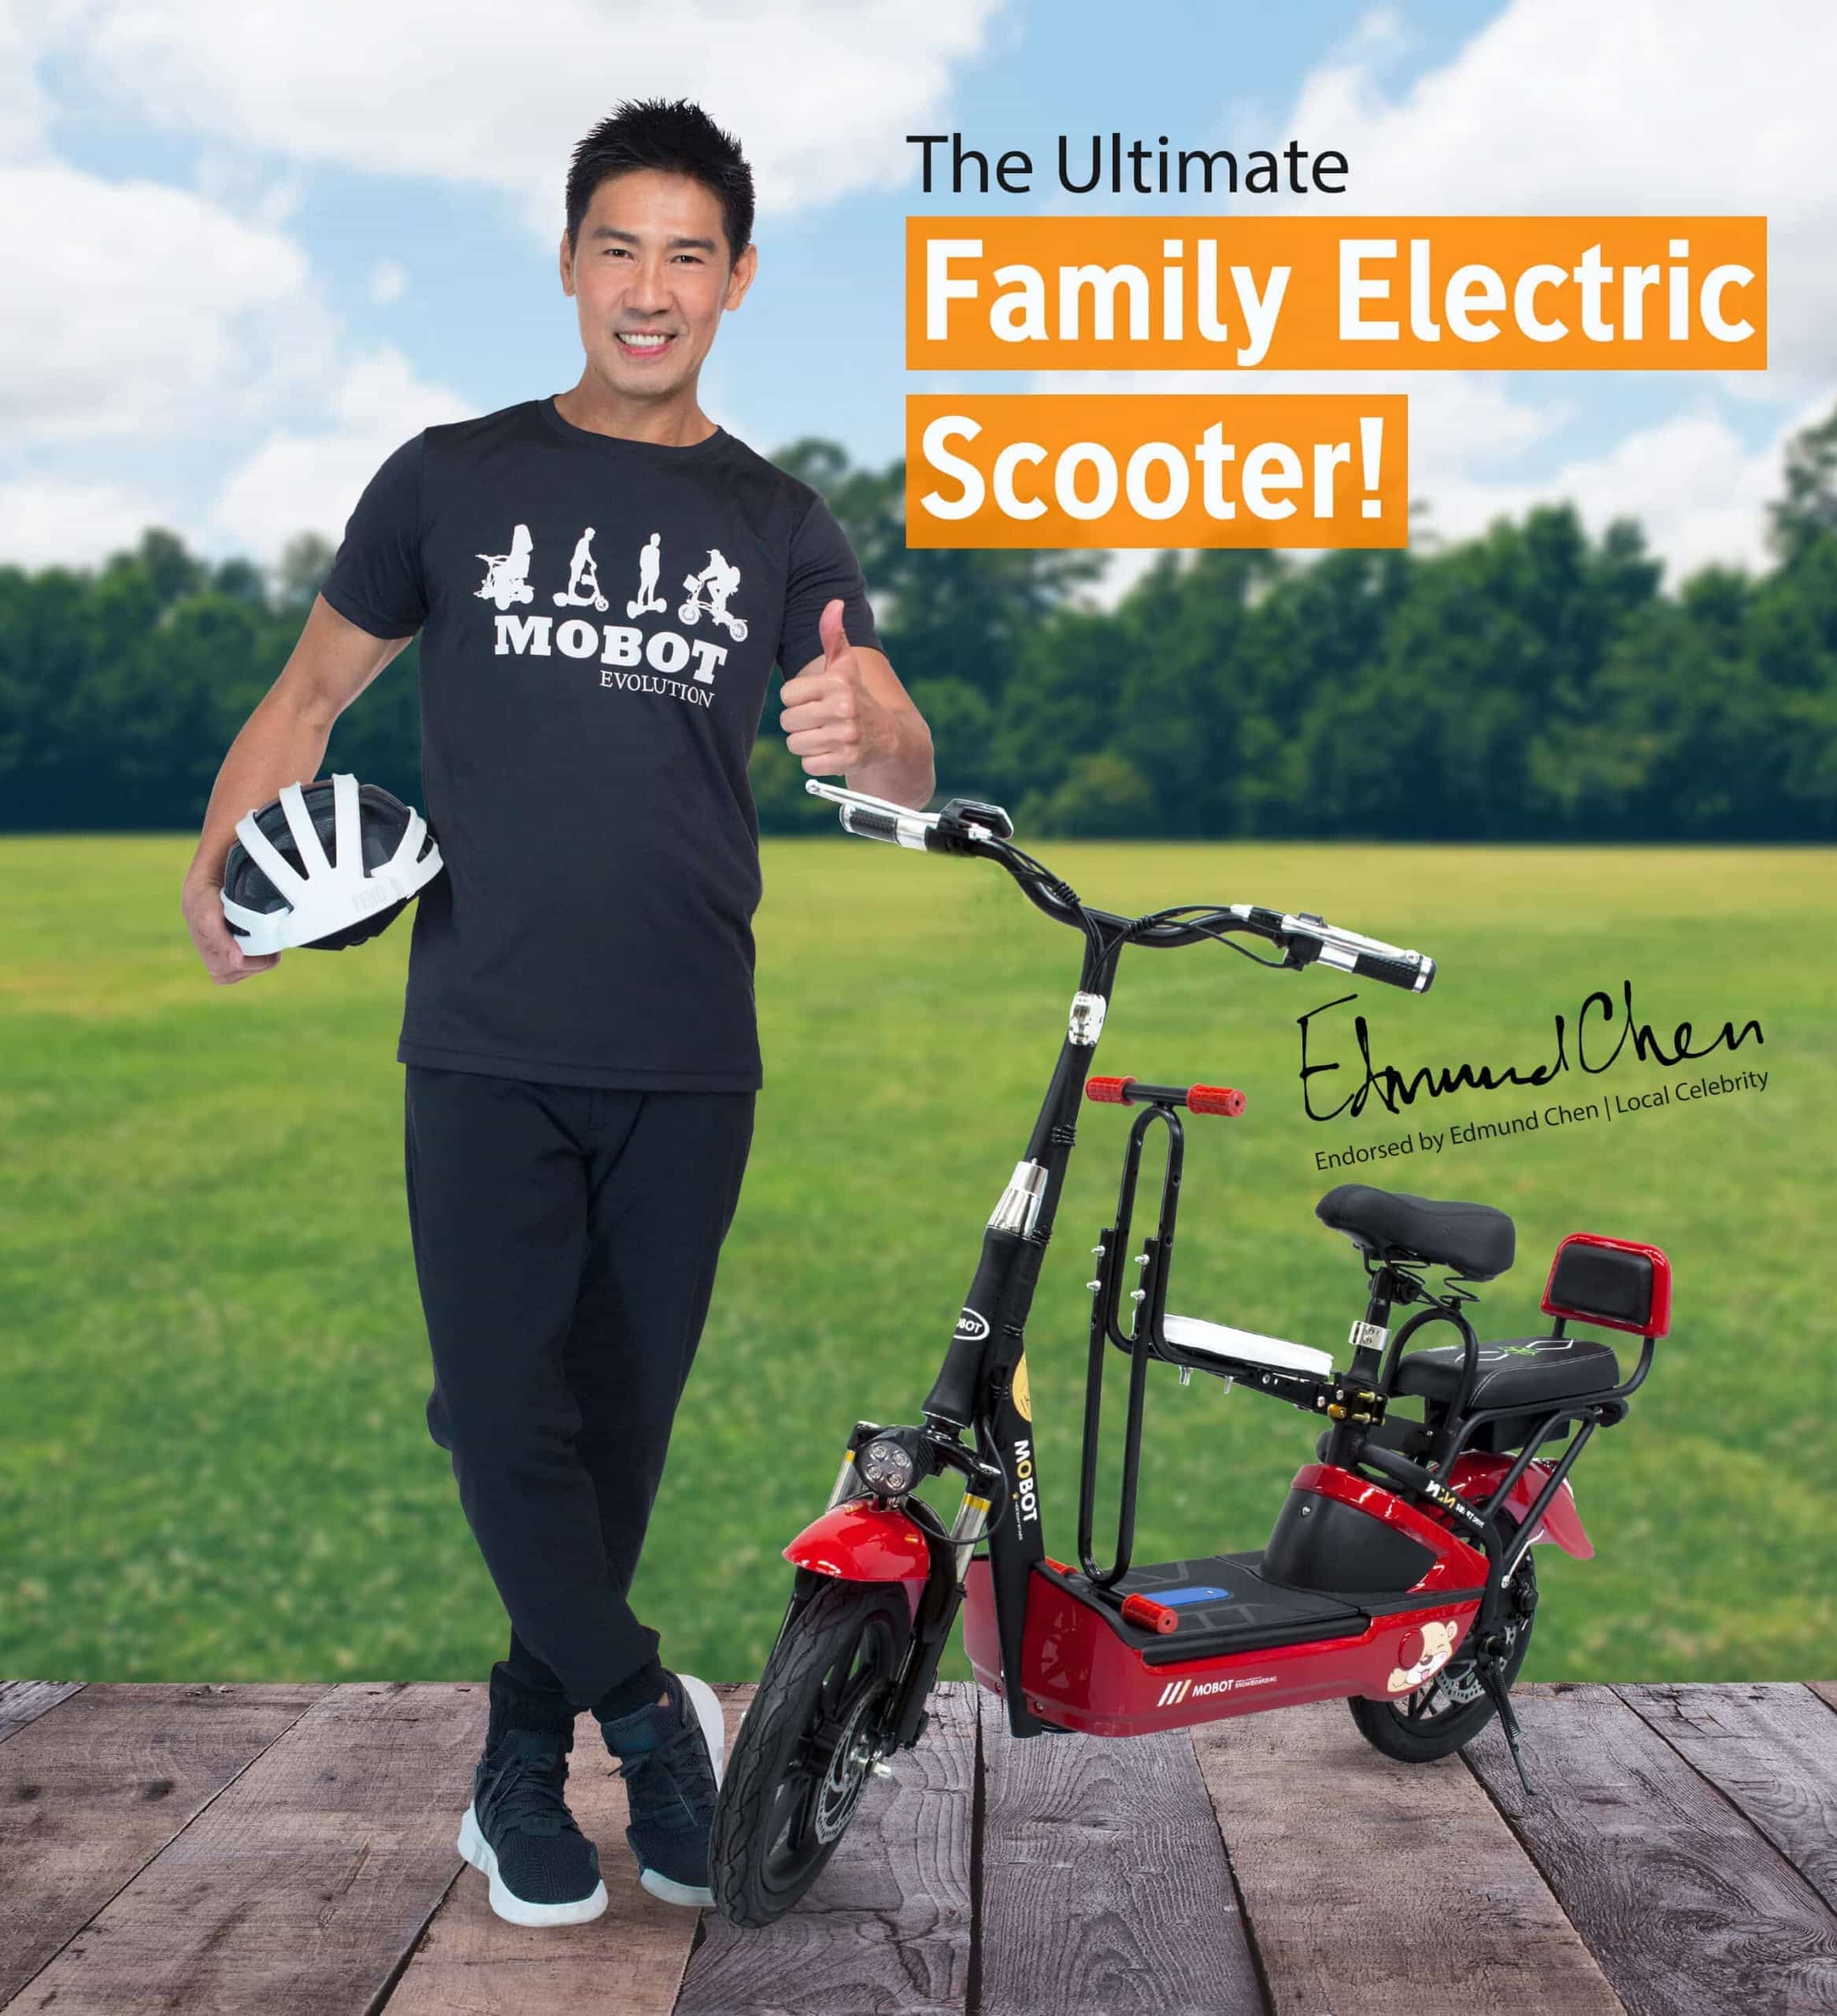 MOBOT EV UL2272 certified seated e-scooter edmund chen